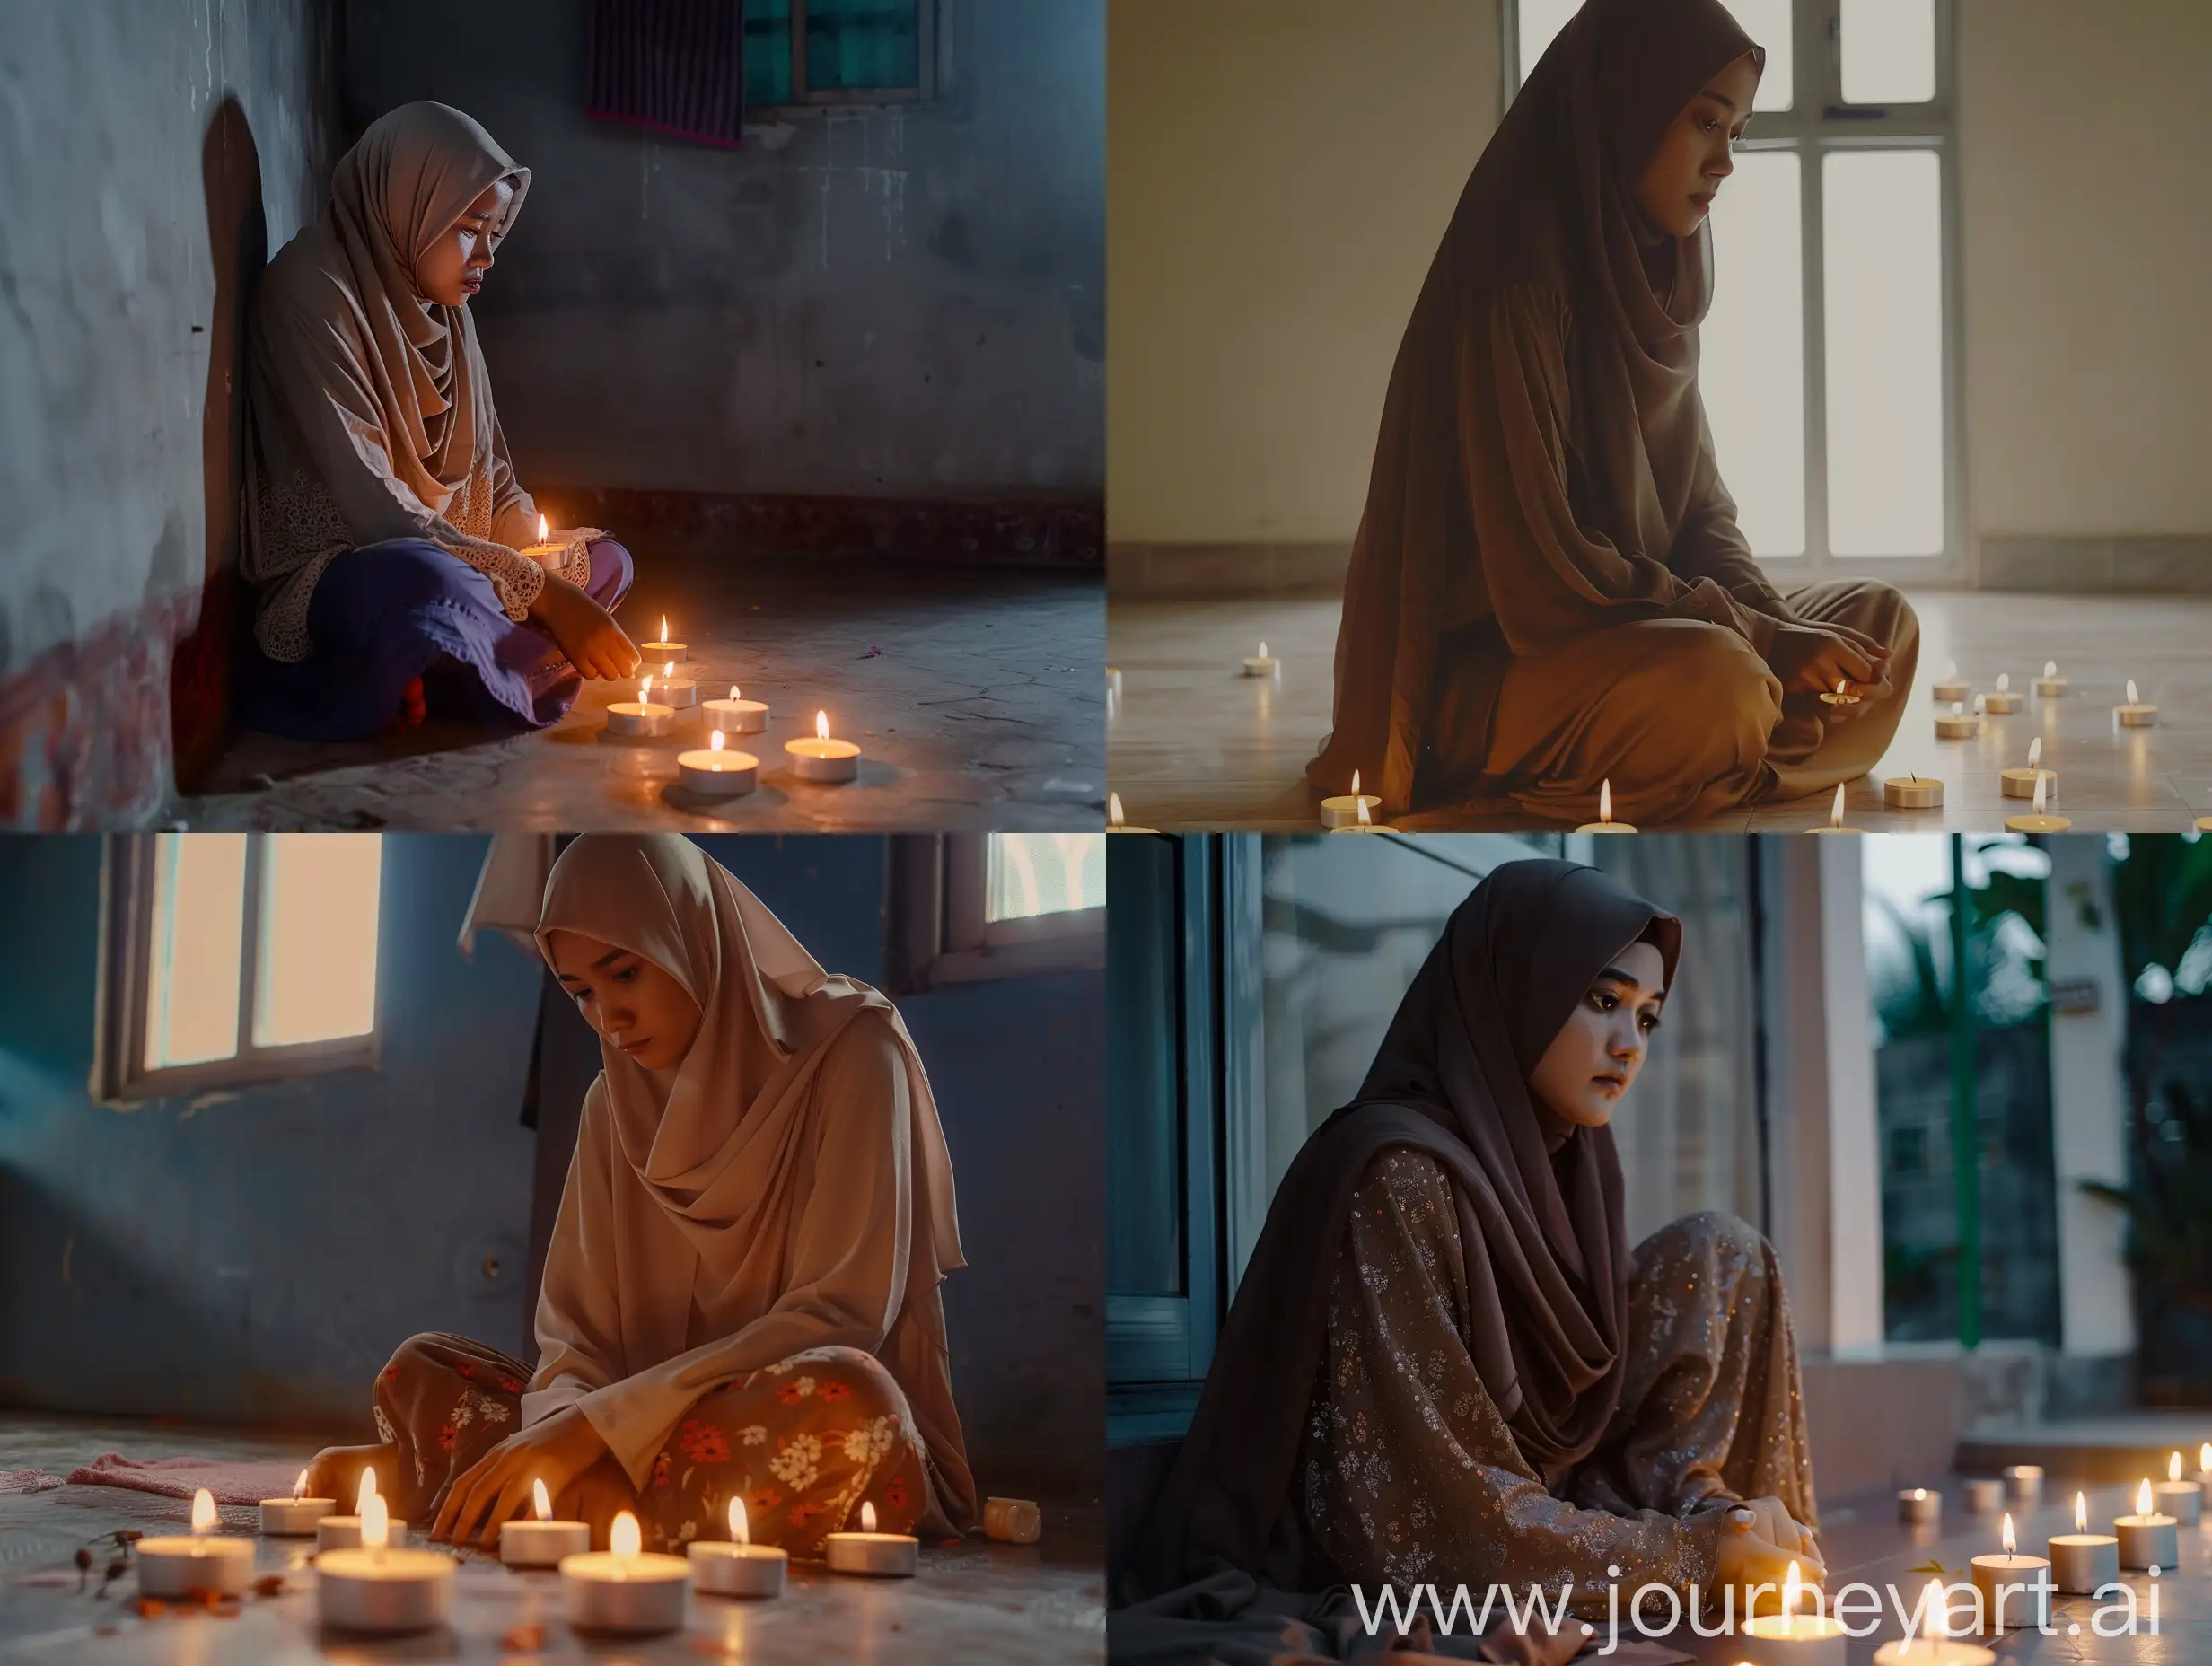 cinematic film, an Indonesian woman, wearing a hijab, 27 years old, sitting alone in a room in a simple house. She lights candles around the room, creating a mysterious atmosphere., side view, full body shot